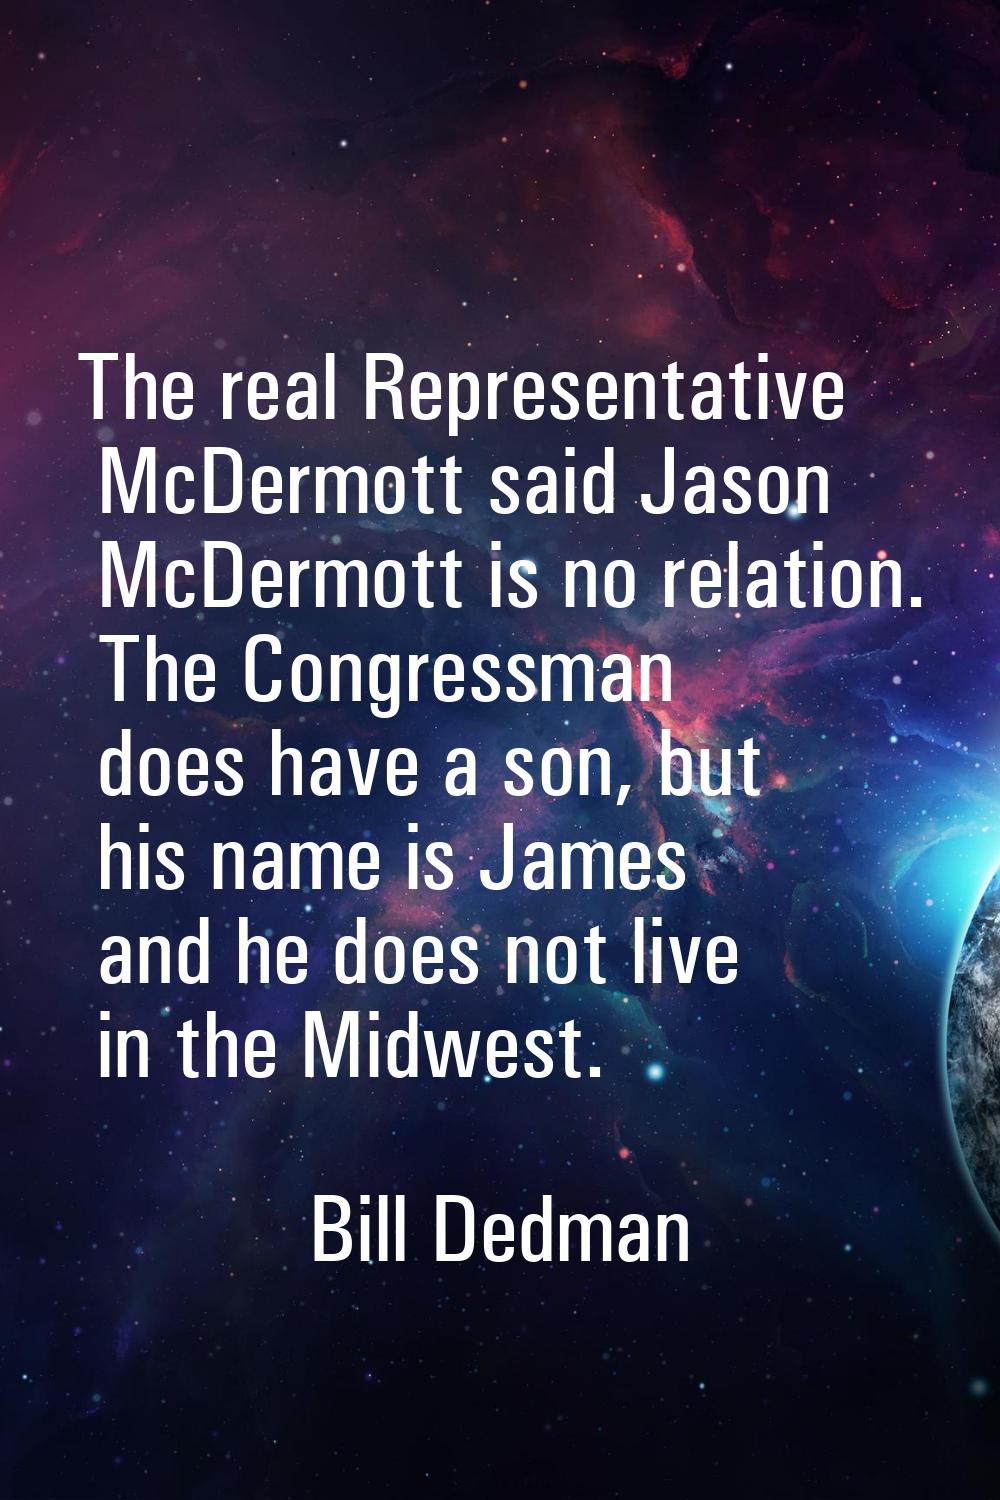 The real Representative McDermott said Jason McDermott is no relation. The Congressman does have a 